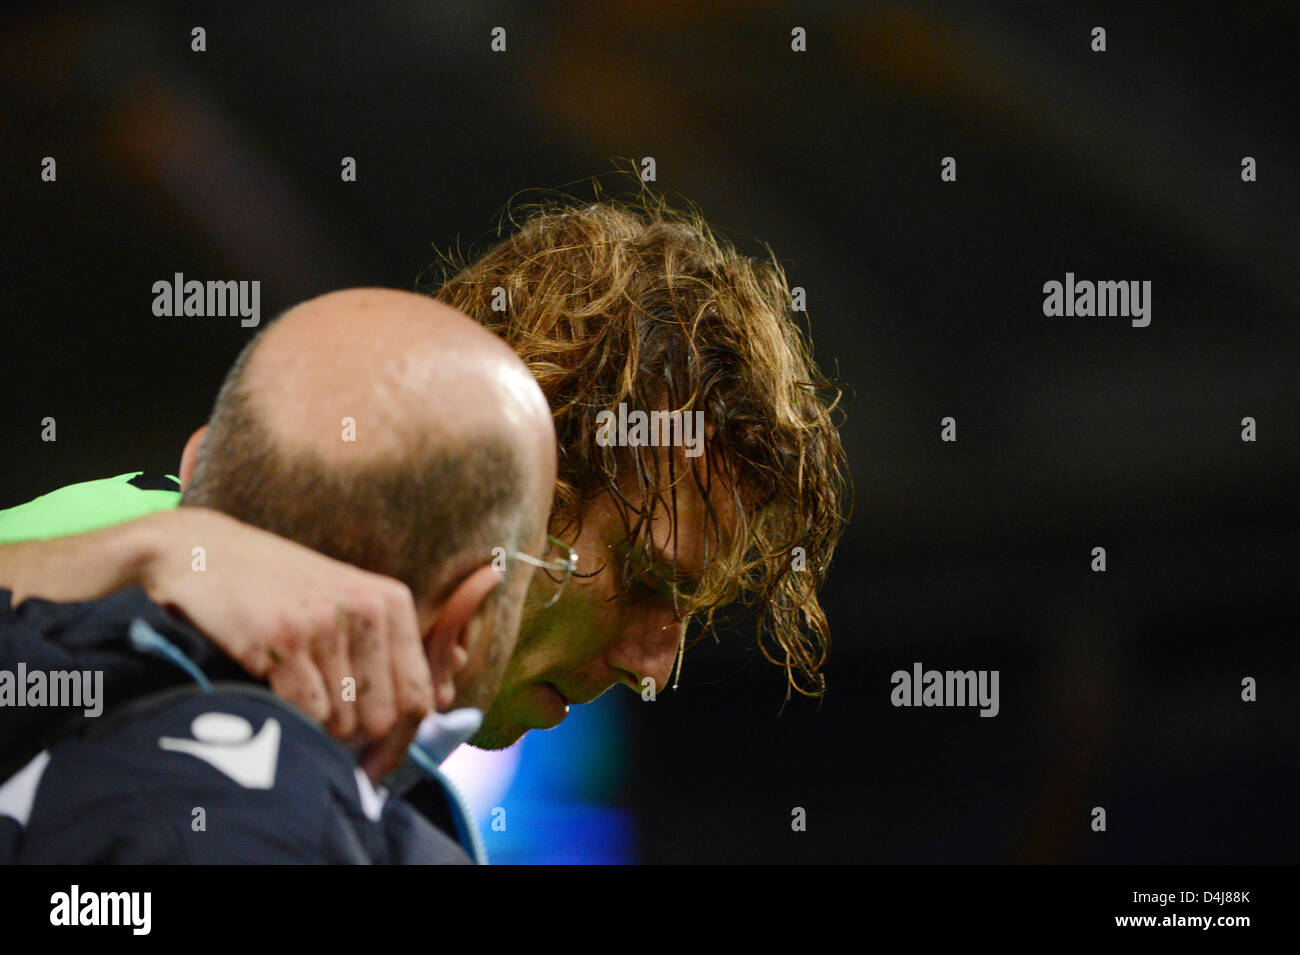 Lazio's goalkeeper Federico Marchetti is leaving the pitch due to an injury during the UEFA Europa League Round of 16 second leg soccer match between Lazio Rome and VfB Stuttgart at Stadio Olimpico in Rome, Italy, 14 March 2013. Foto: Marijan Murat/dpa Stock Photo